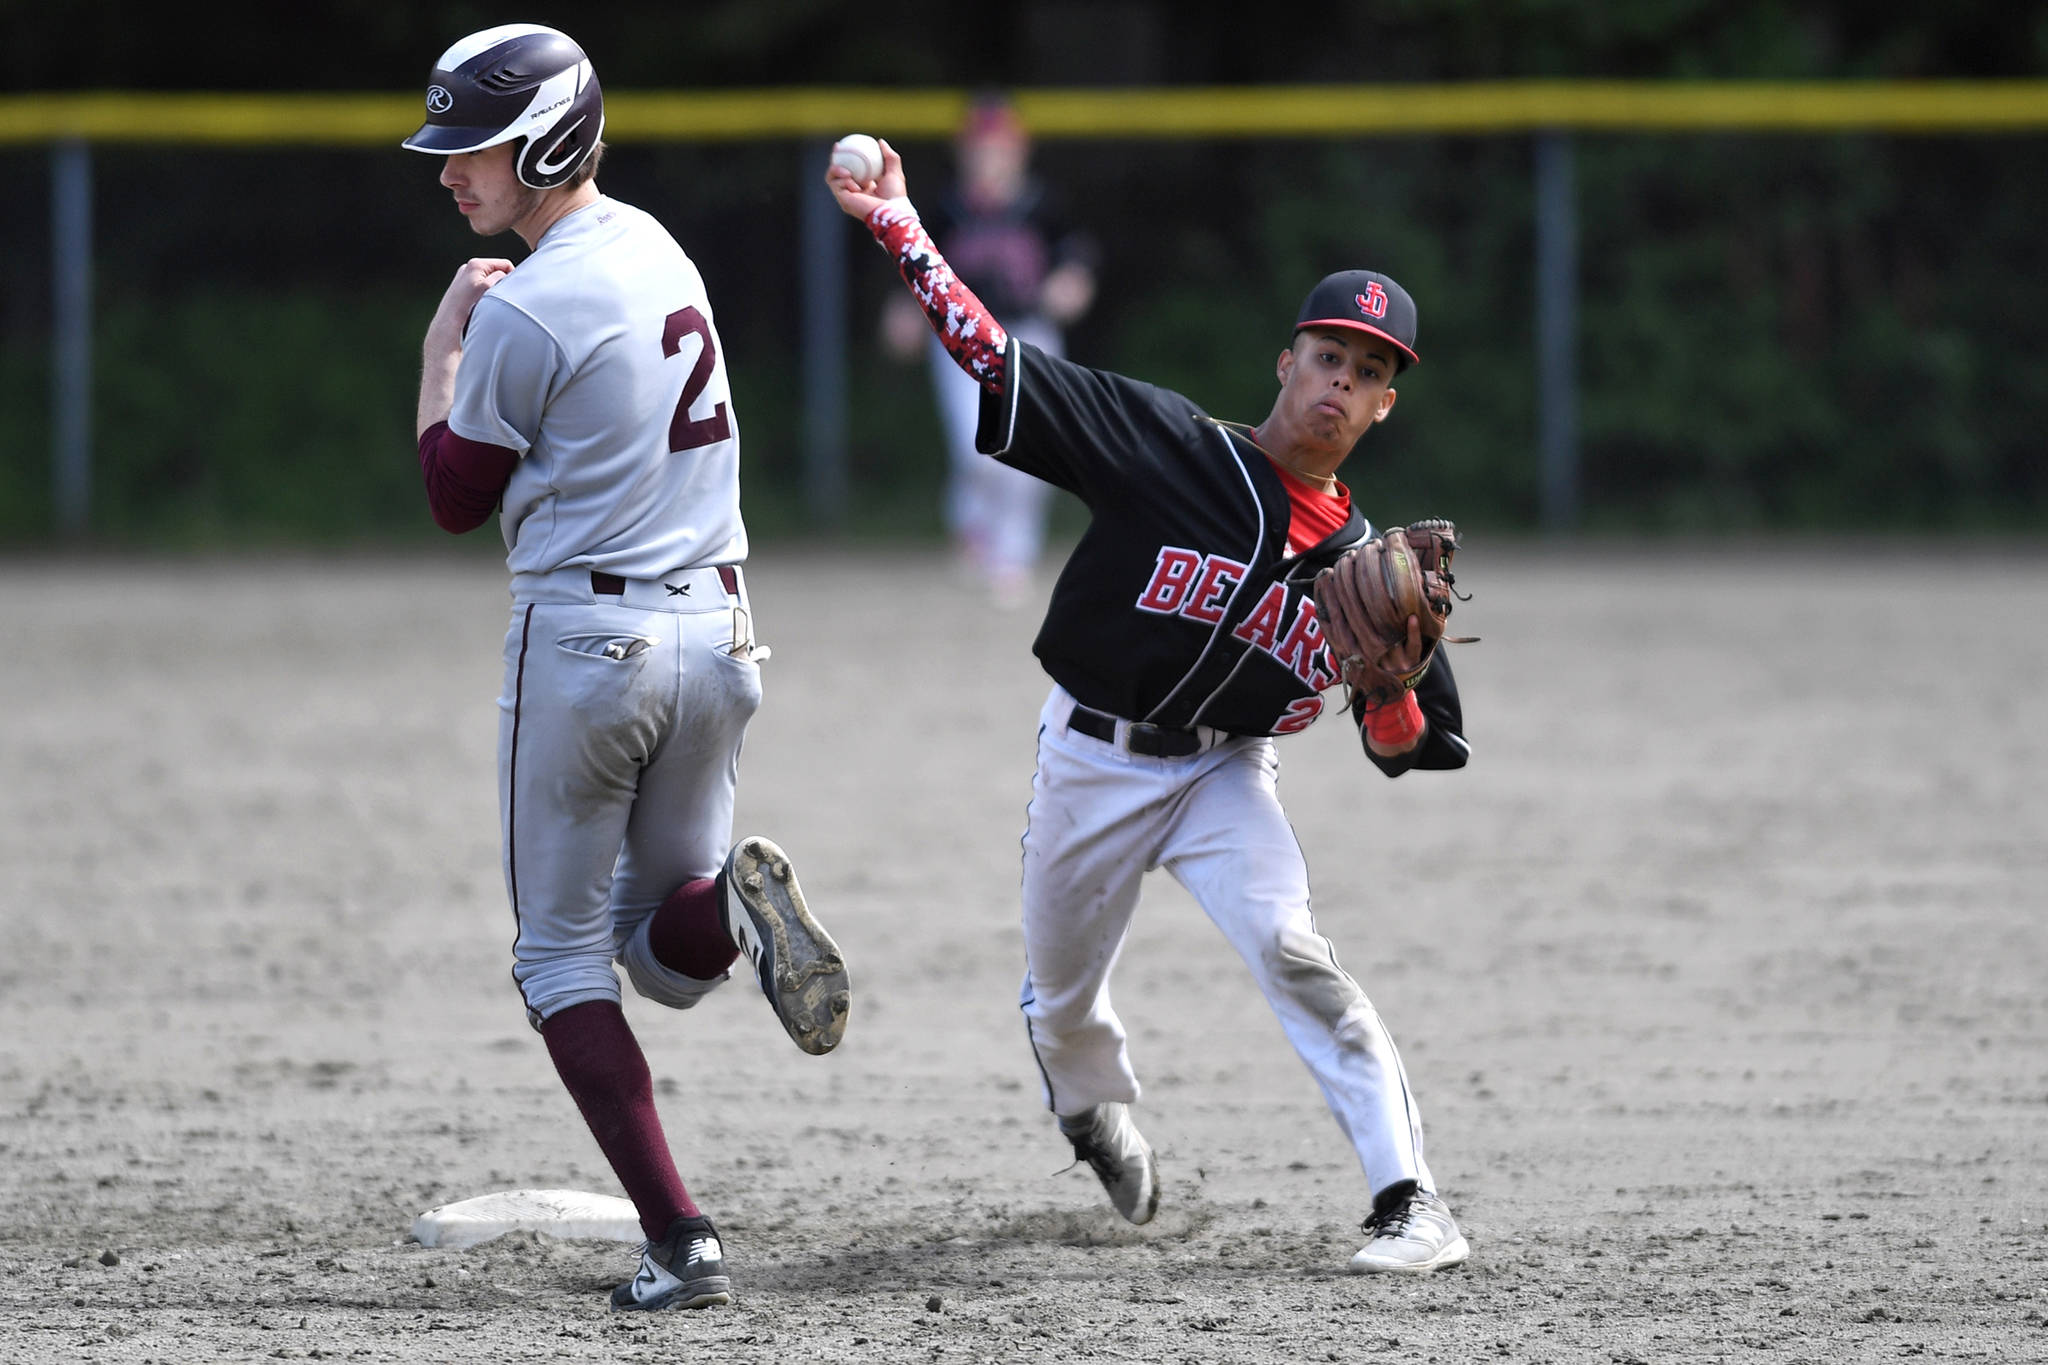 JDHS stymied by Valley pitchers at state tournament